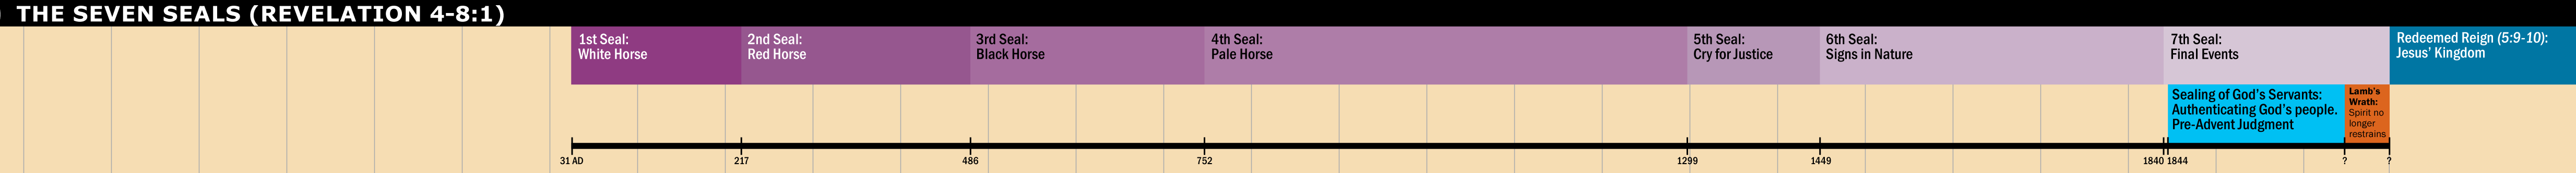 Prophecy timeline of the 7 Seals in Revelation 4-7